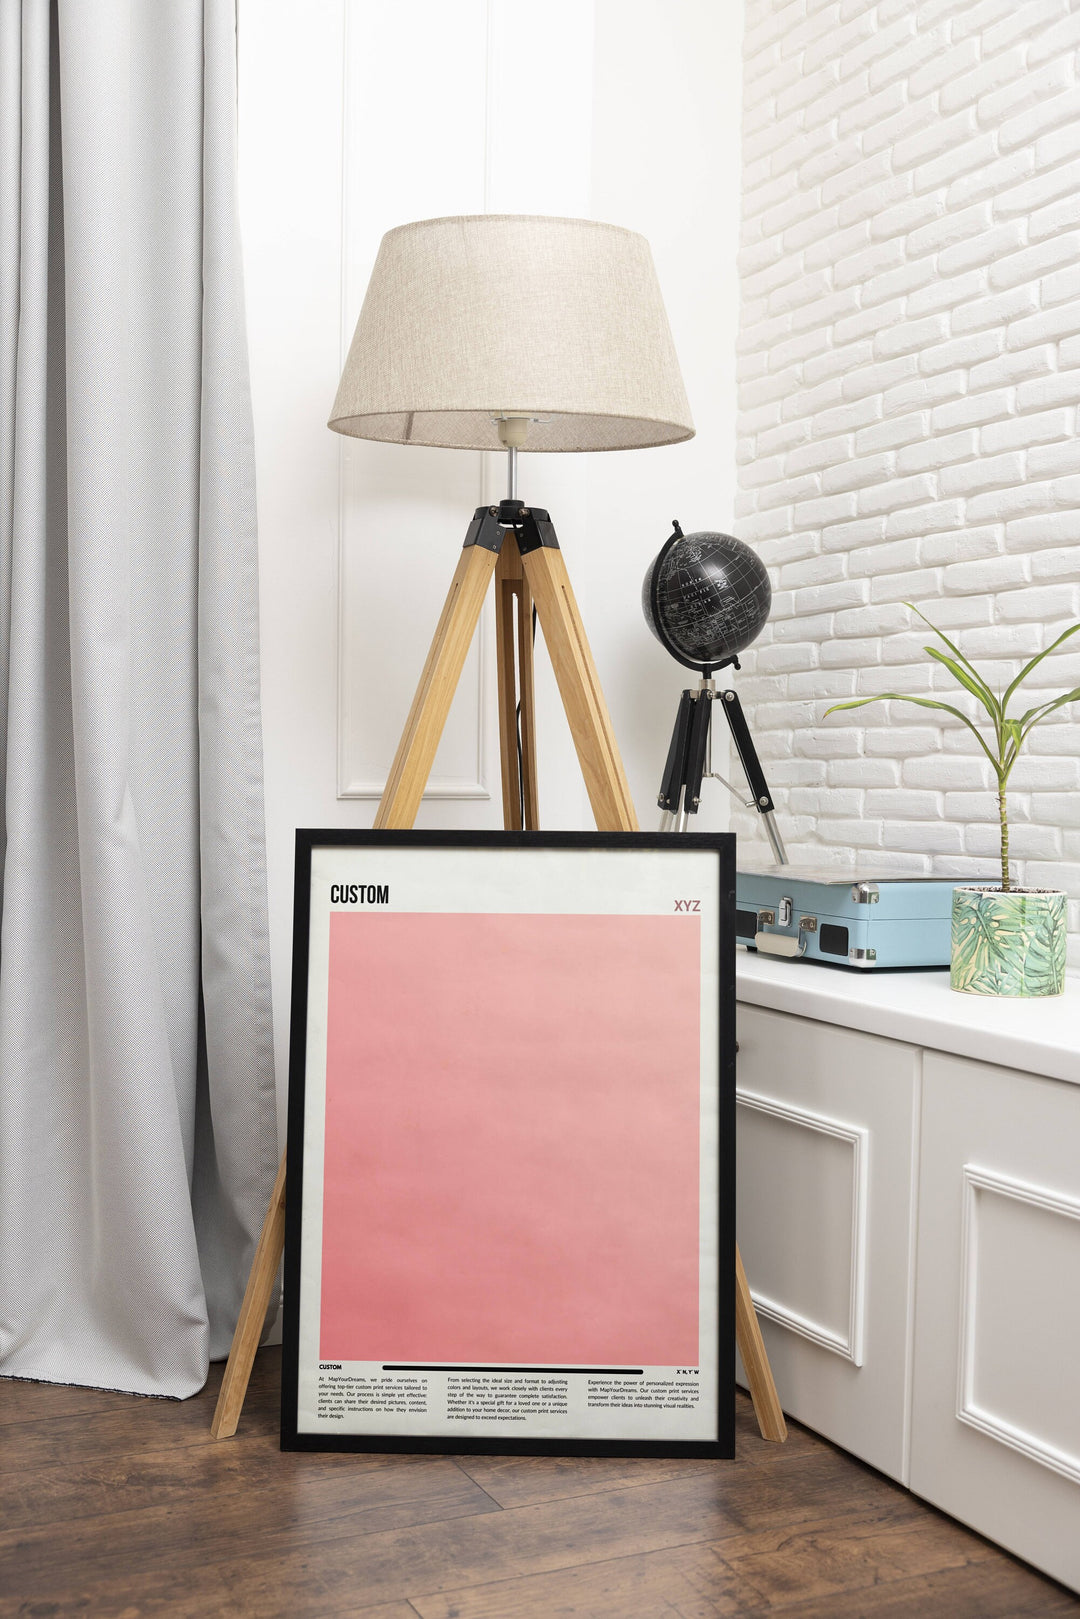 a picture frame sitting on a wooden floor next to a lamp